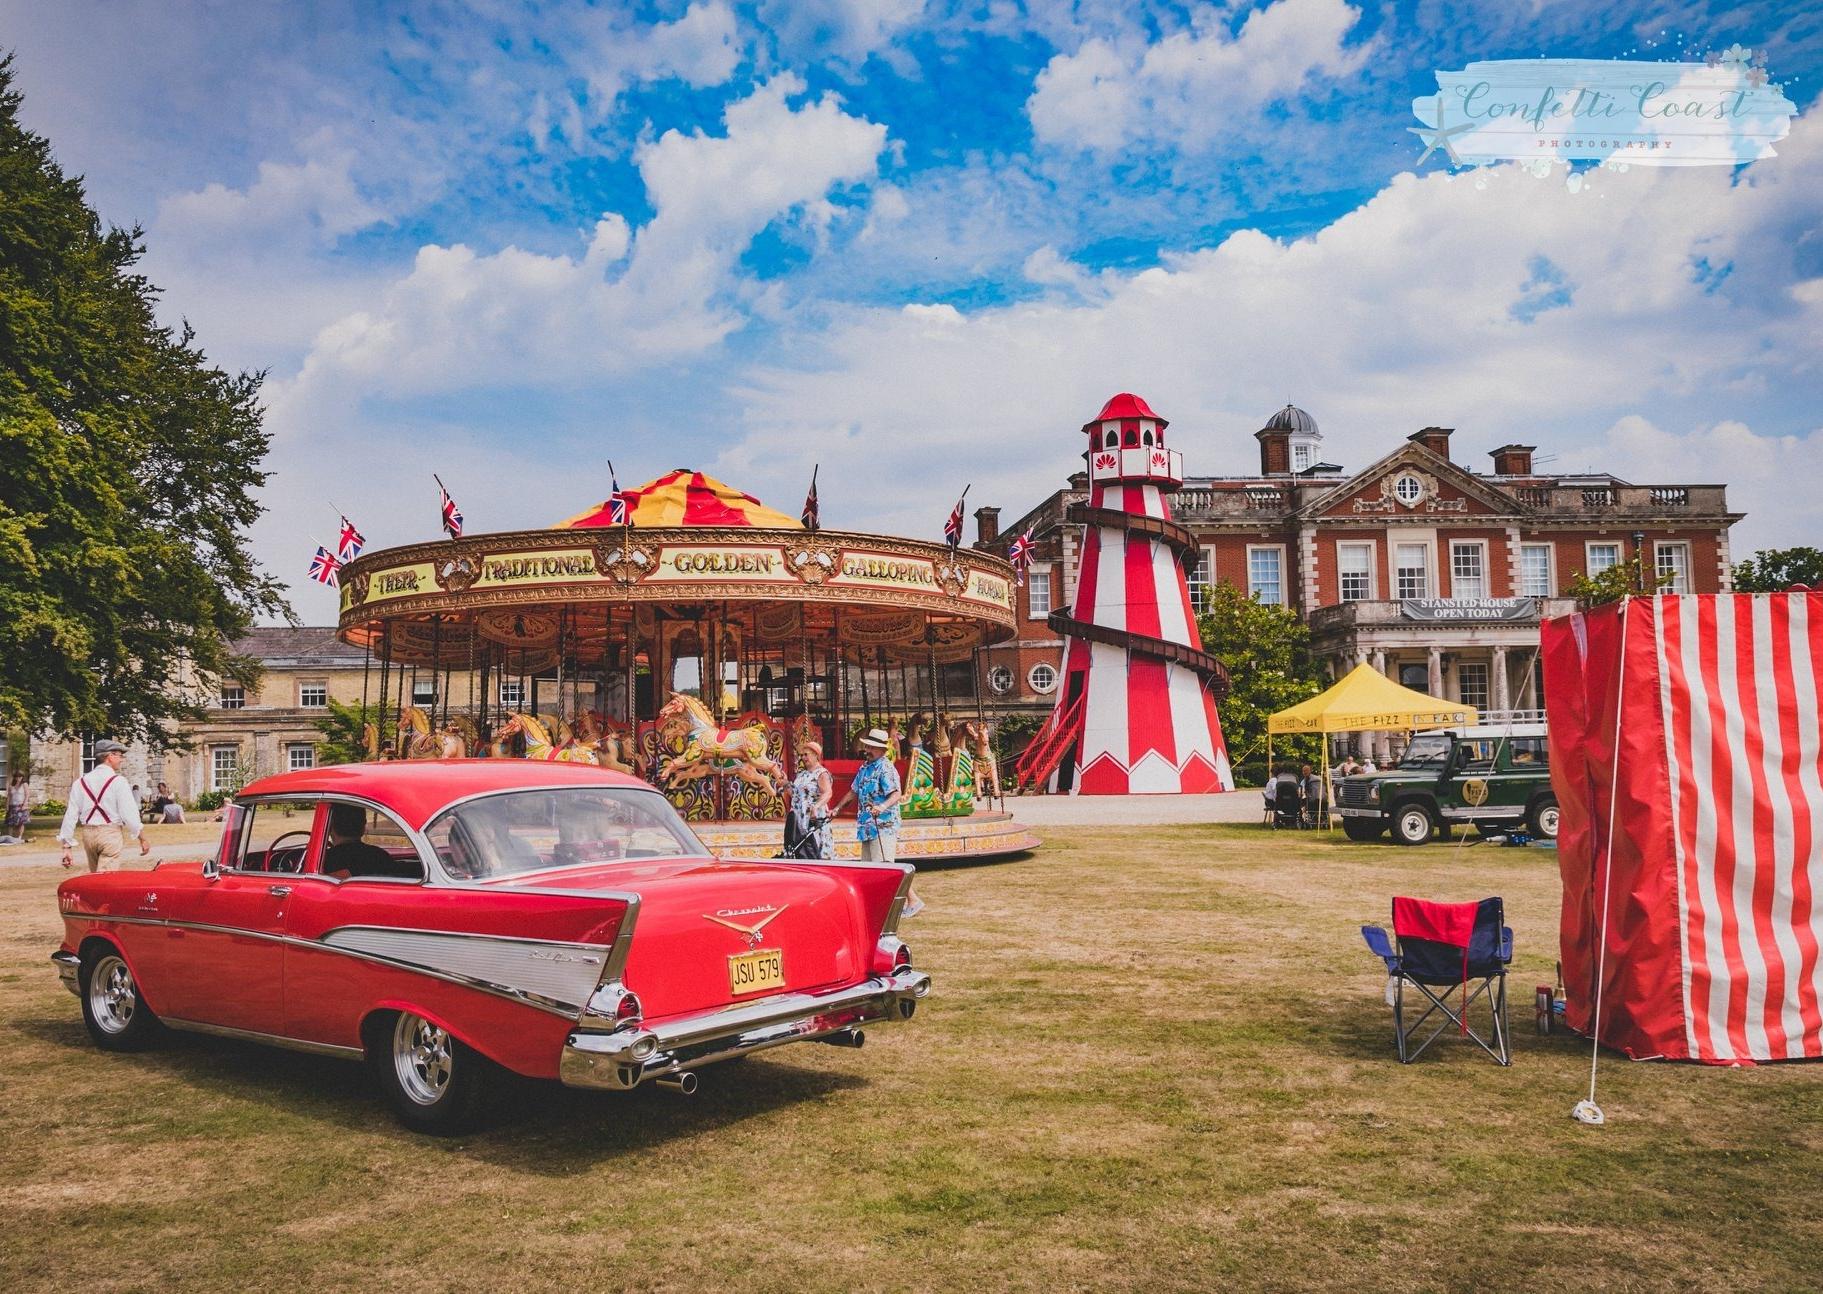 The Nostalgia Show comes to Stansted Park in Stoughton from June 26-28